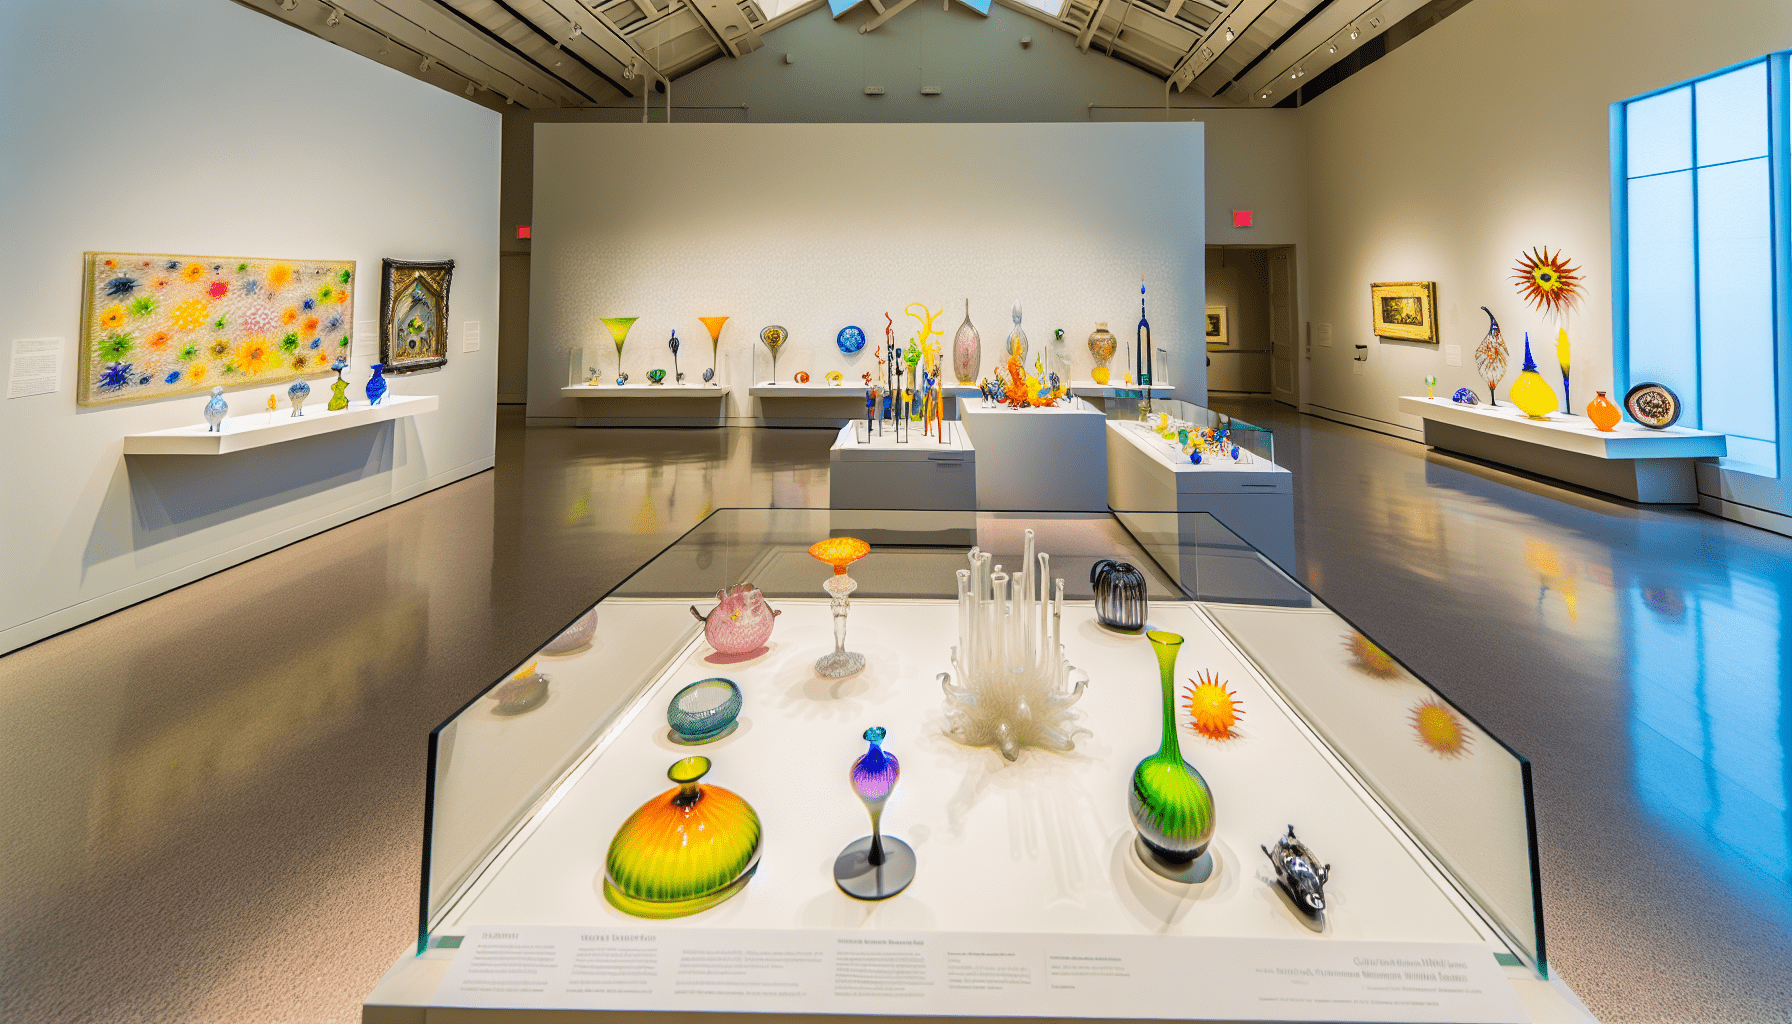 Exquisite collection of West Virginia glass art displayed in a museum